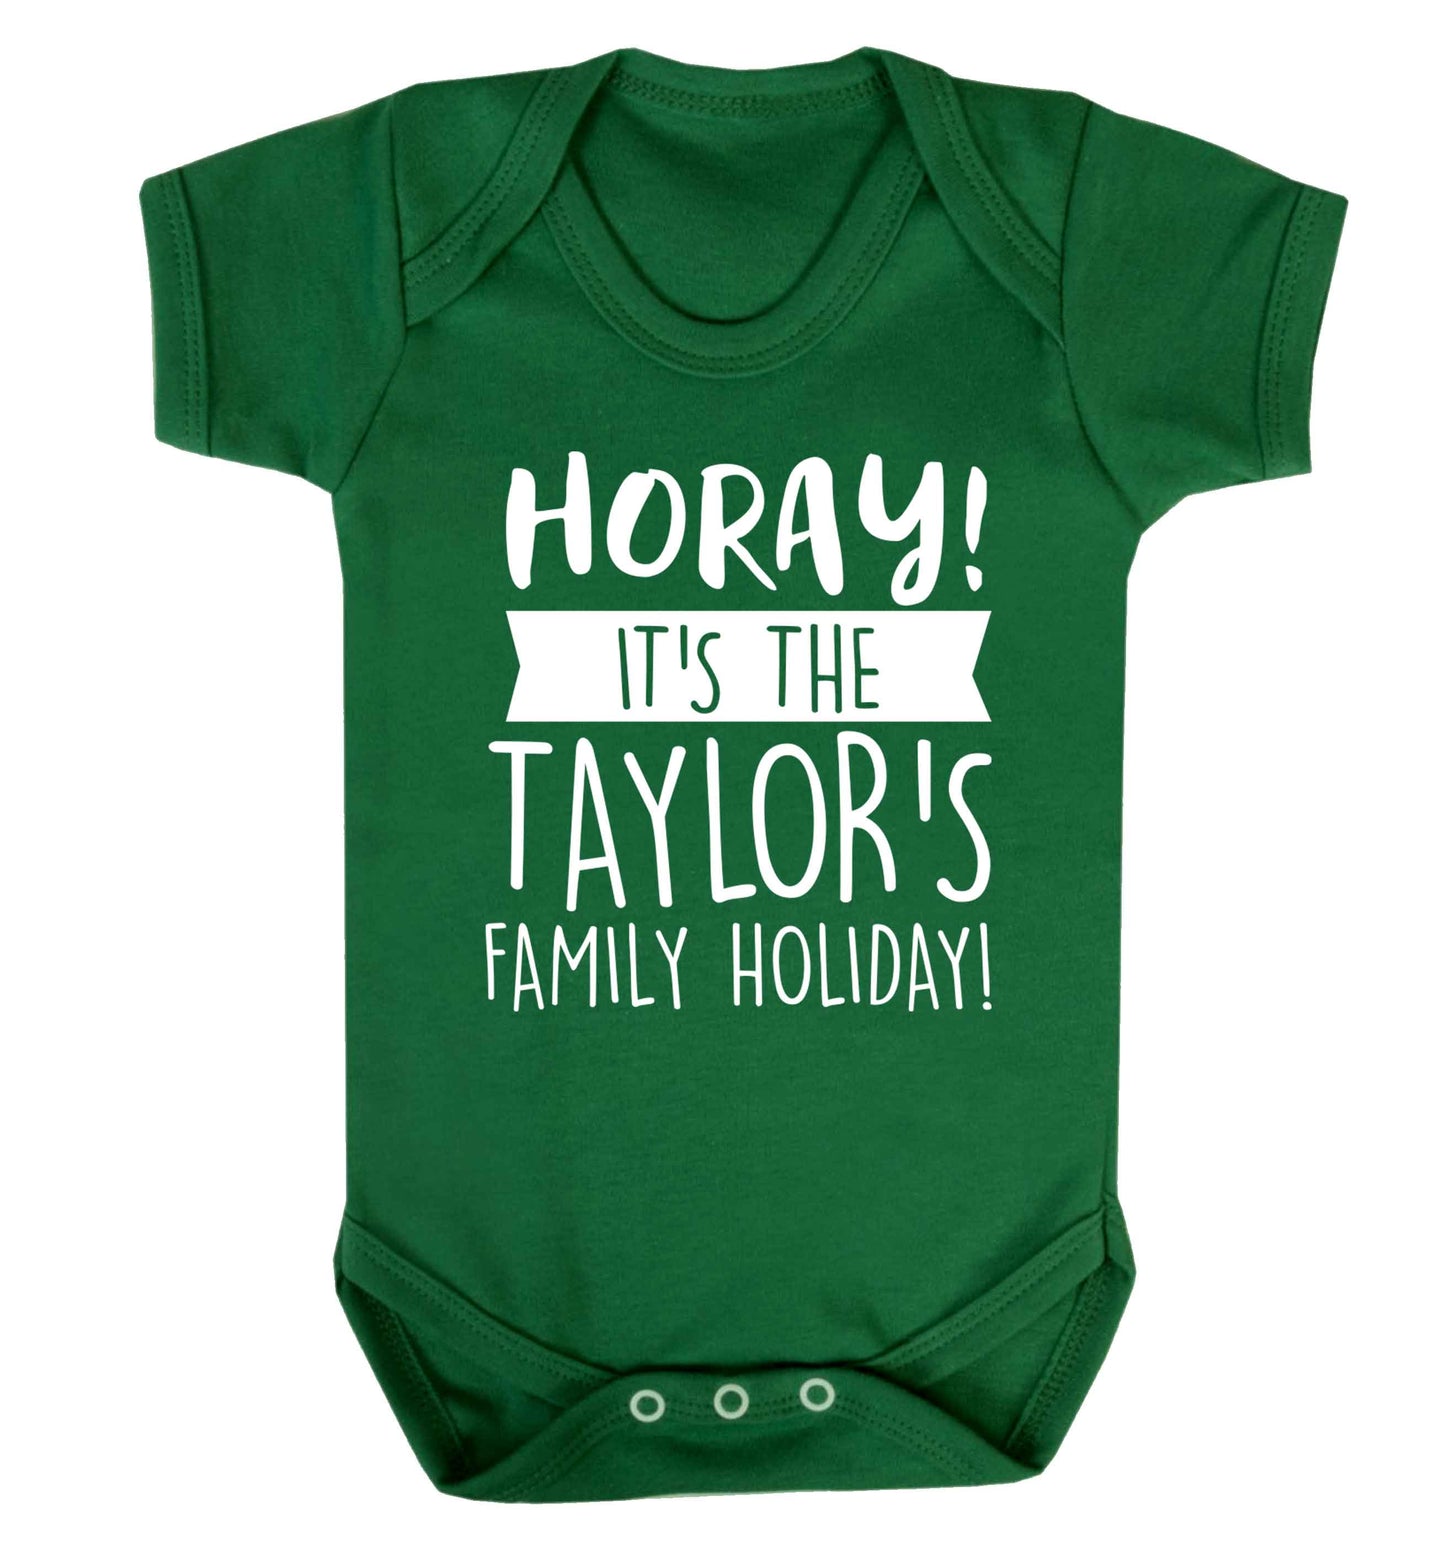 Horay it's the Taylor's family holiday! personalised item Baby Vest green 18-24 months